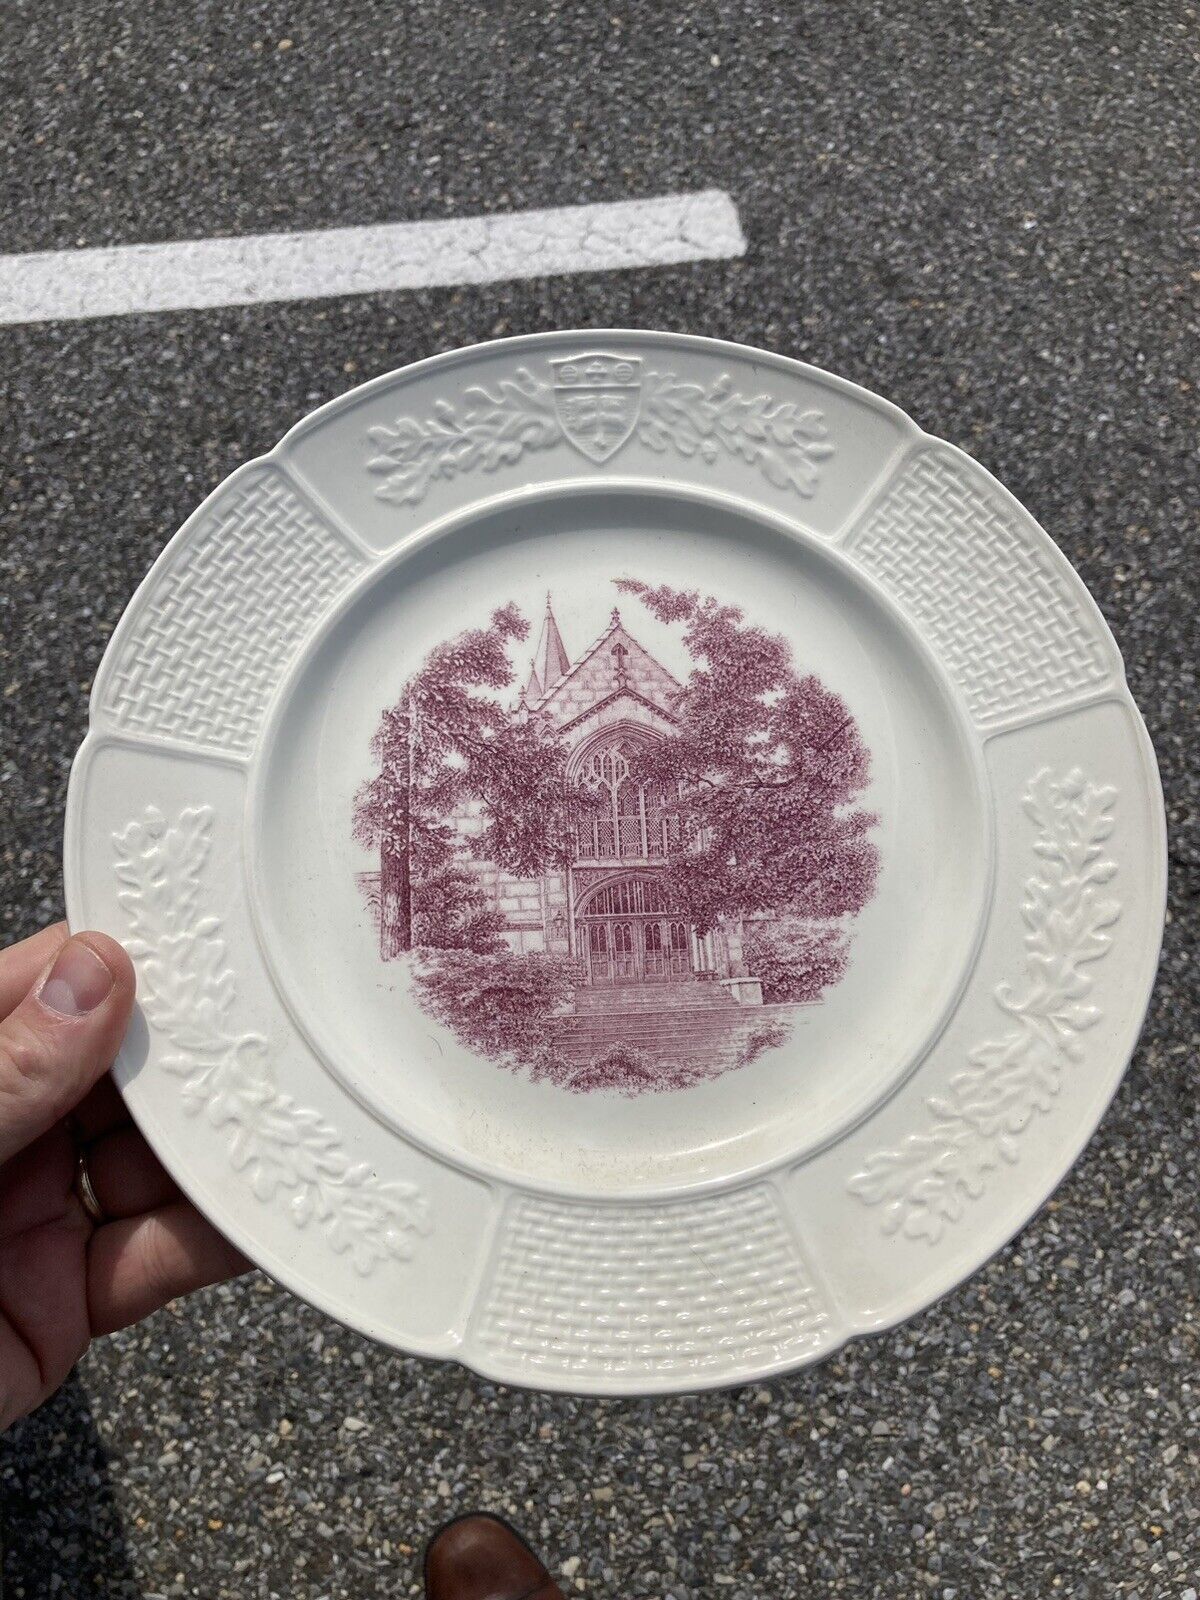 Vtg 1946 Wedgwood Fine China Decorative Red Plate - Wellesley College Chapel